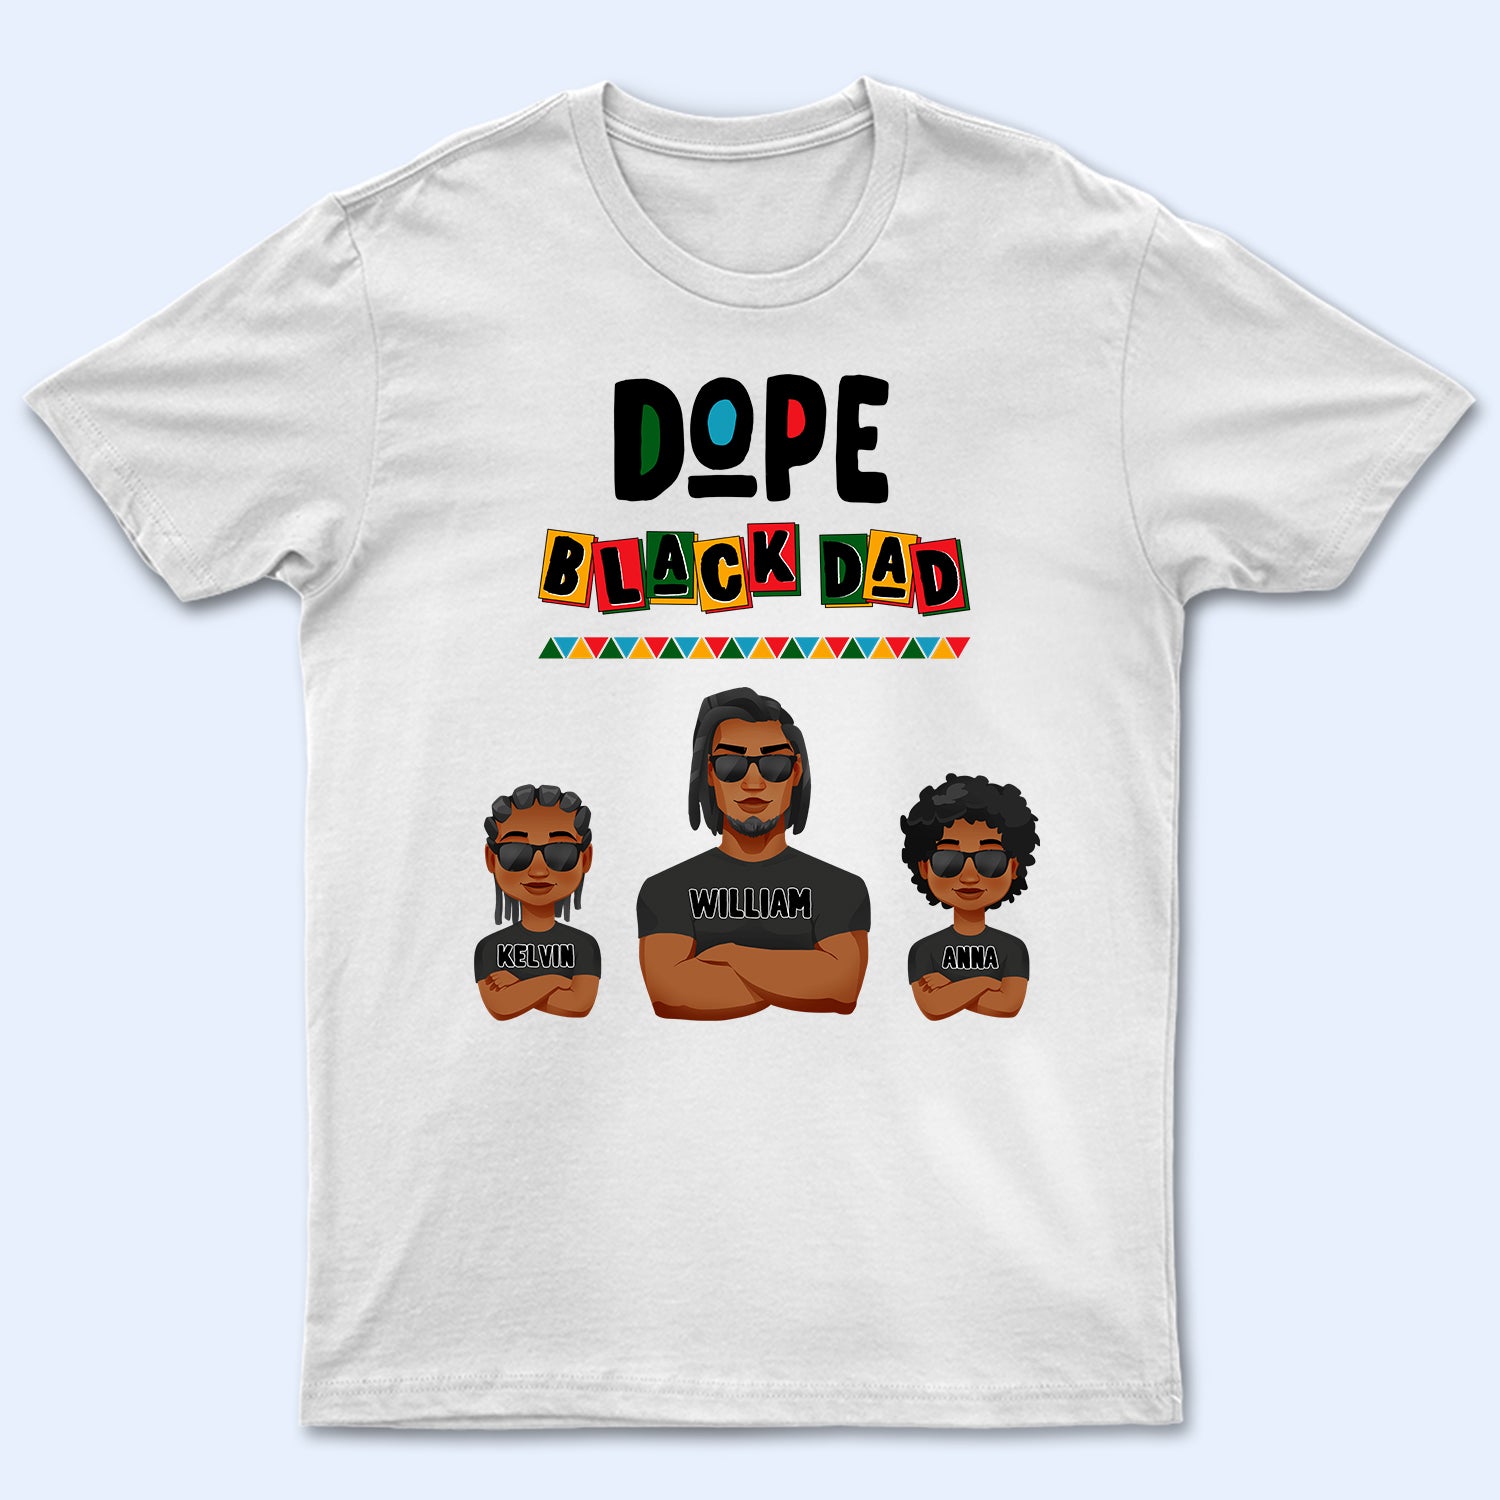 Dope Black Dad - Best Gift For Dad - Personalized T Shirt